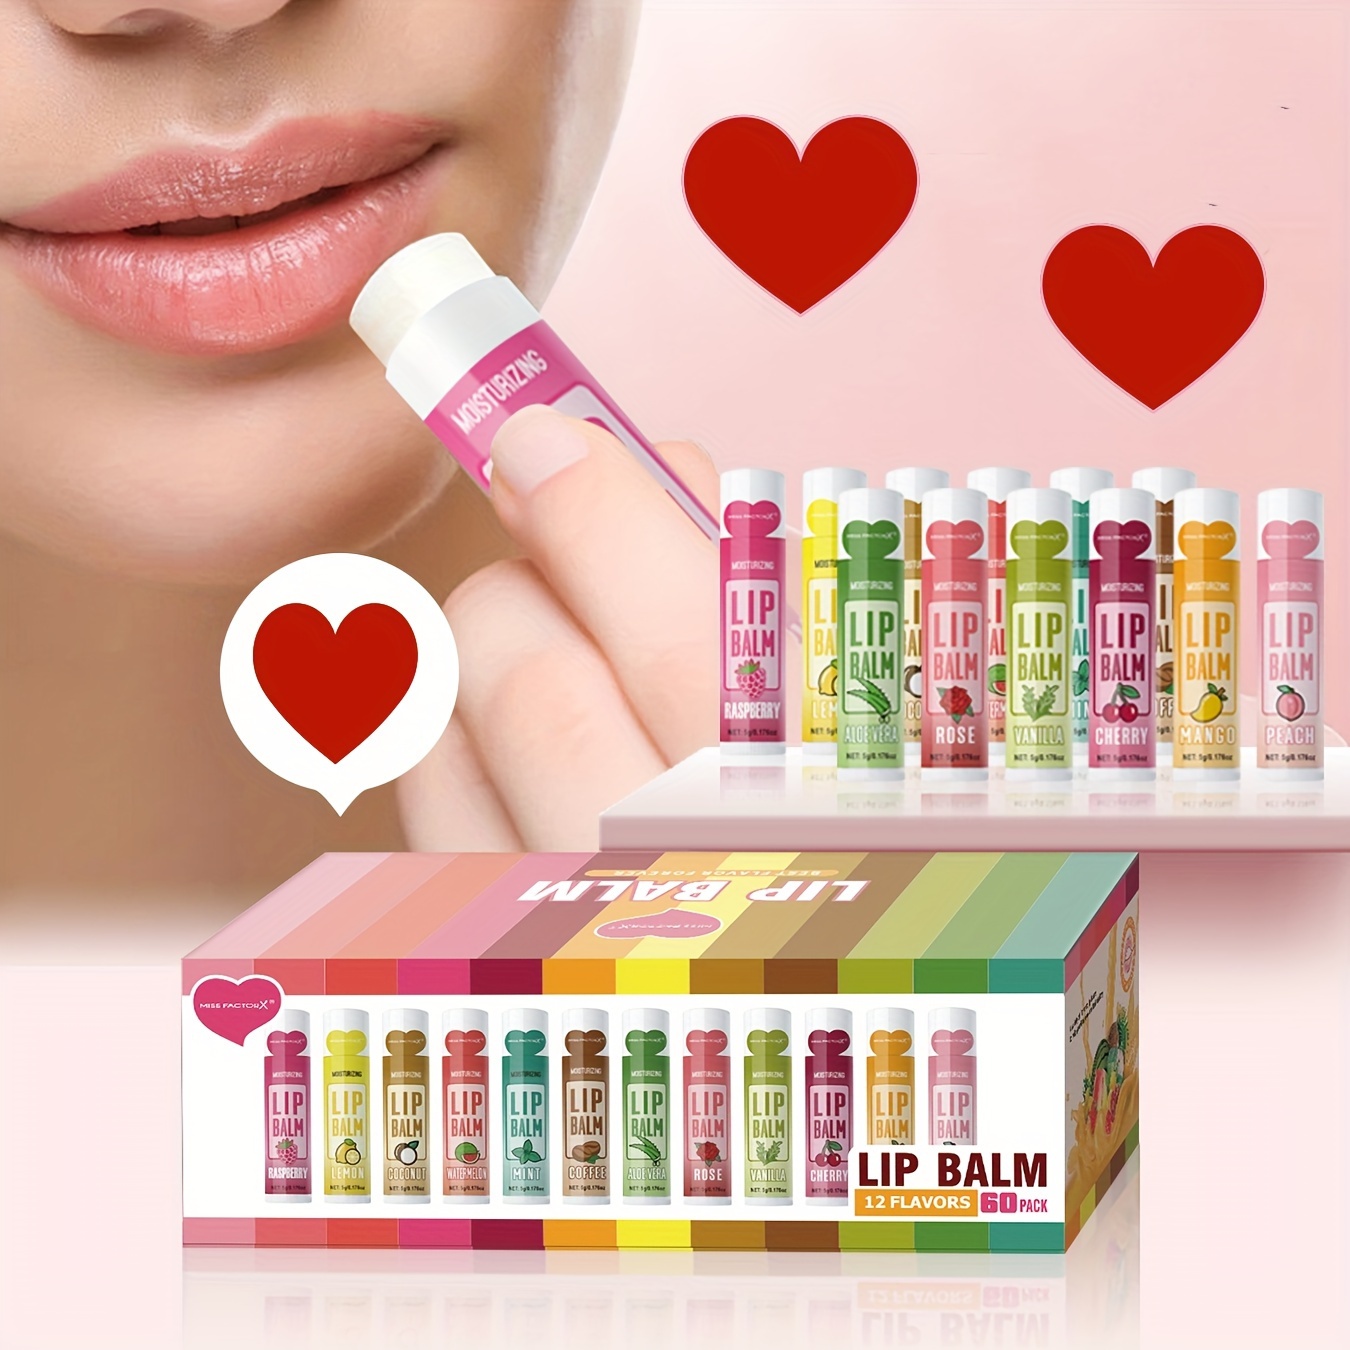 

60pcs/set, 12 Flavors Lip Balm Gift Set, 5g Each, Moisturizing Care For Dry Lips, Brightening Lip Color, Ideal Gift For Women, Party Favors, Festive Holiday Presents